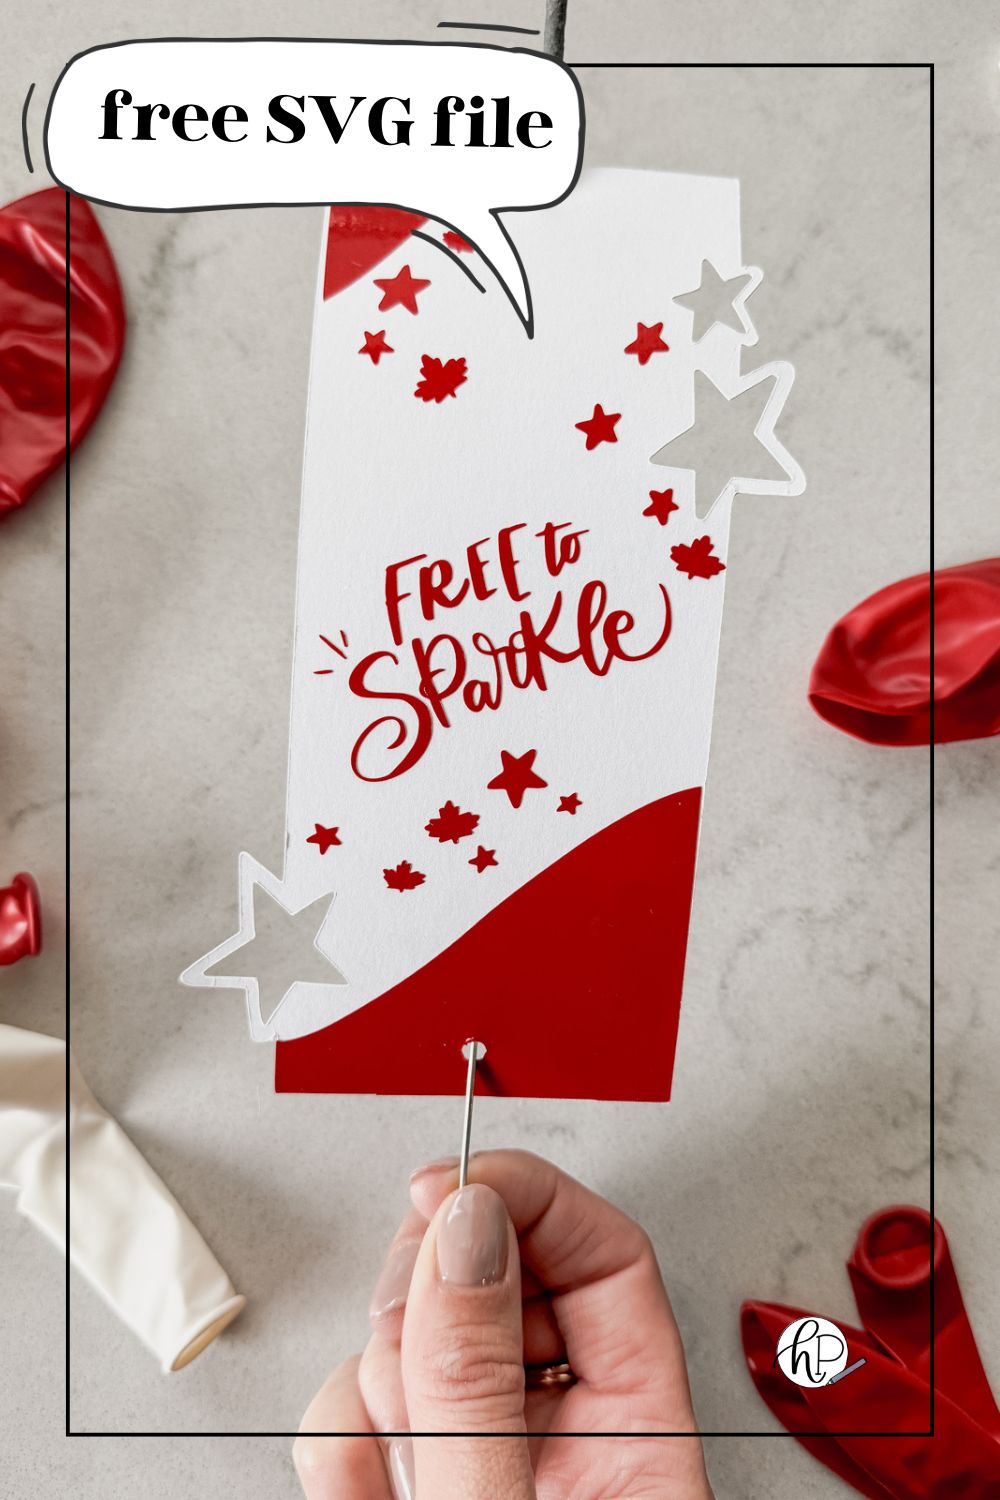 image of sparkler holder made with cricut- design has stars and maple leaves and the hand lettering 'free to sparkle' sparkler holder shown held over marble countertop with red and white balloons text over image reads: free SVG file